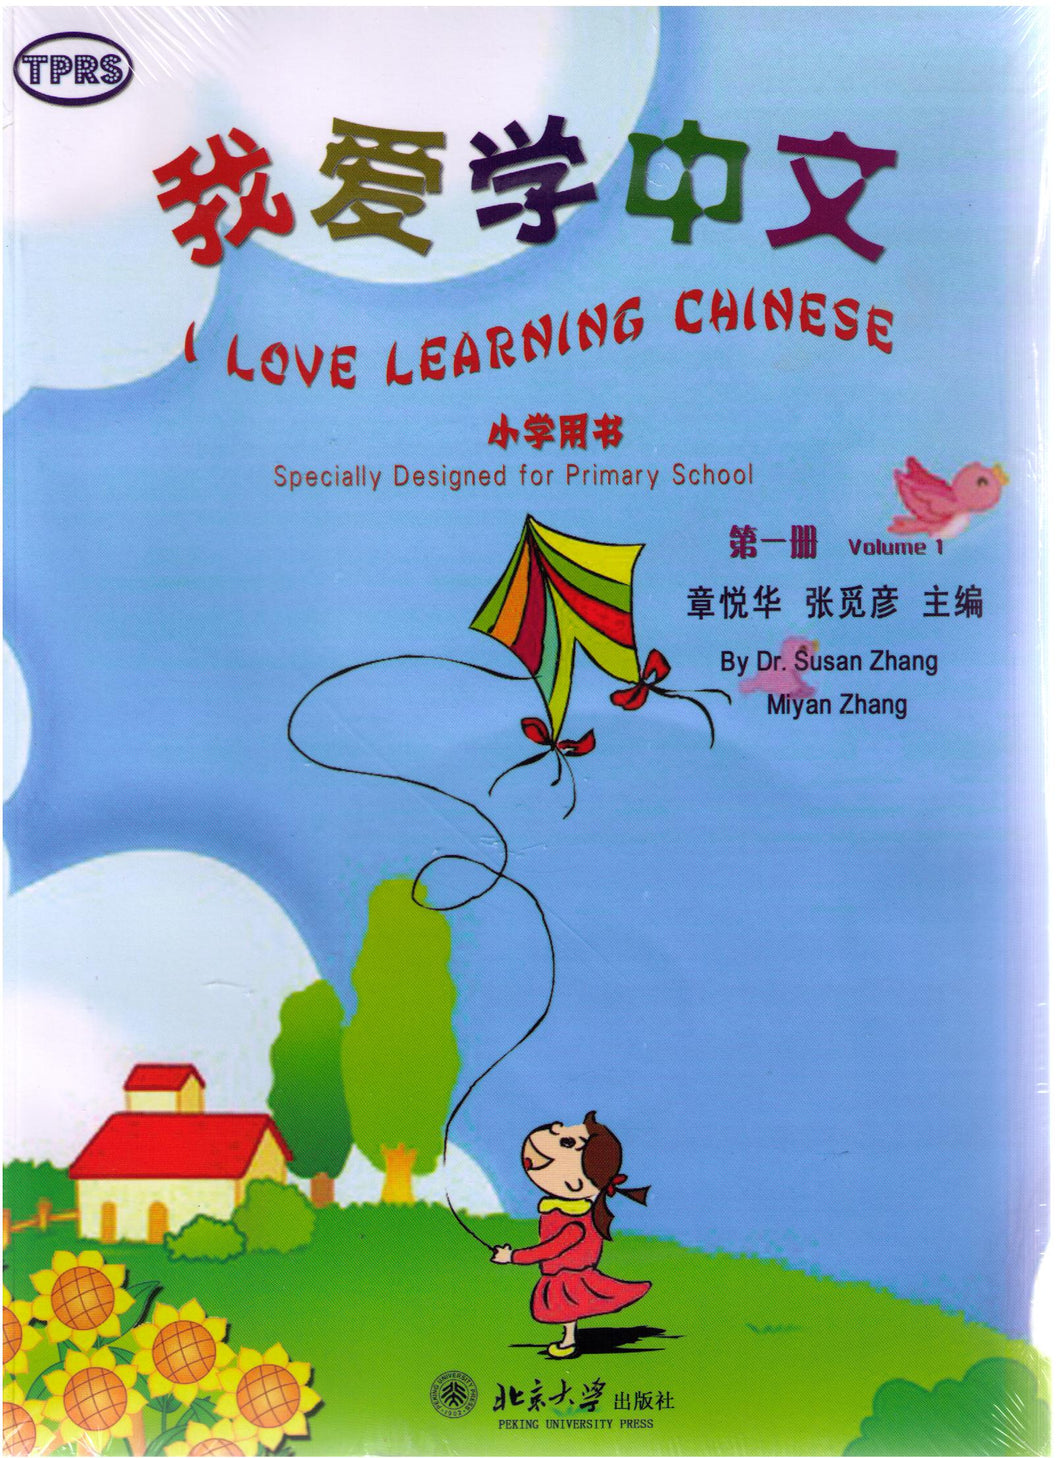 I Love Learning Chinese-Primary School-Volume 1我爱学中文：小学用书